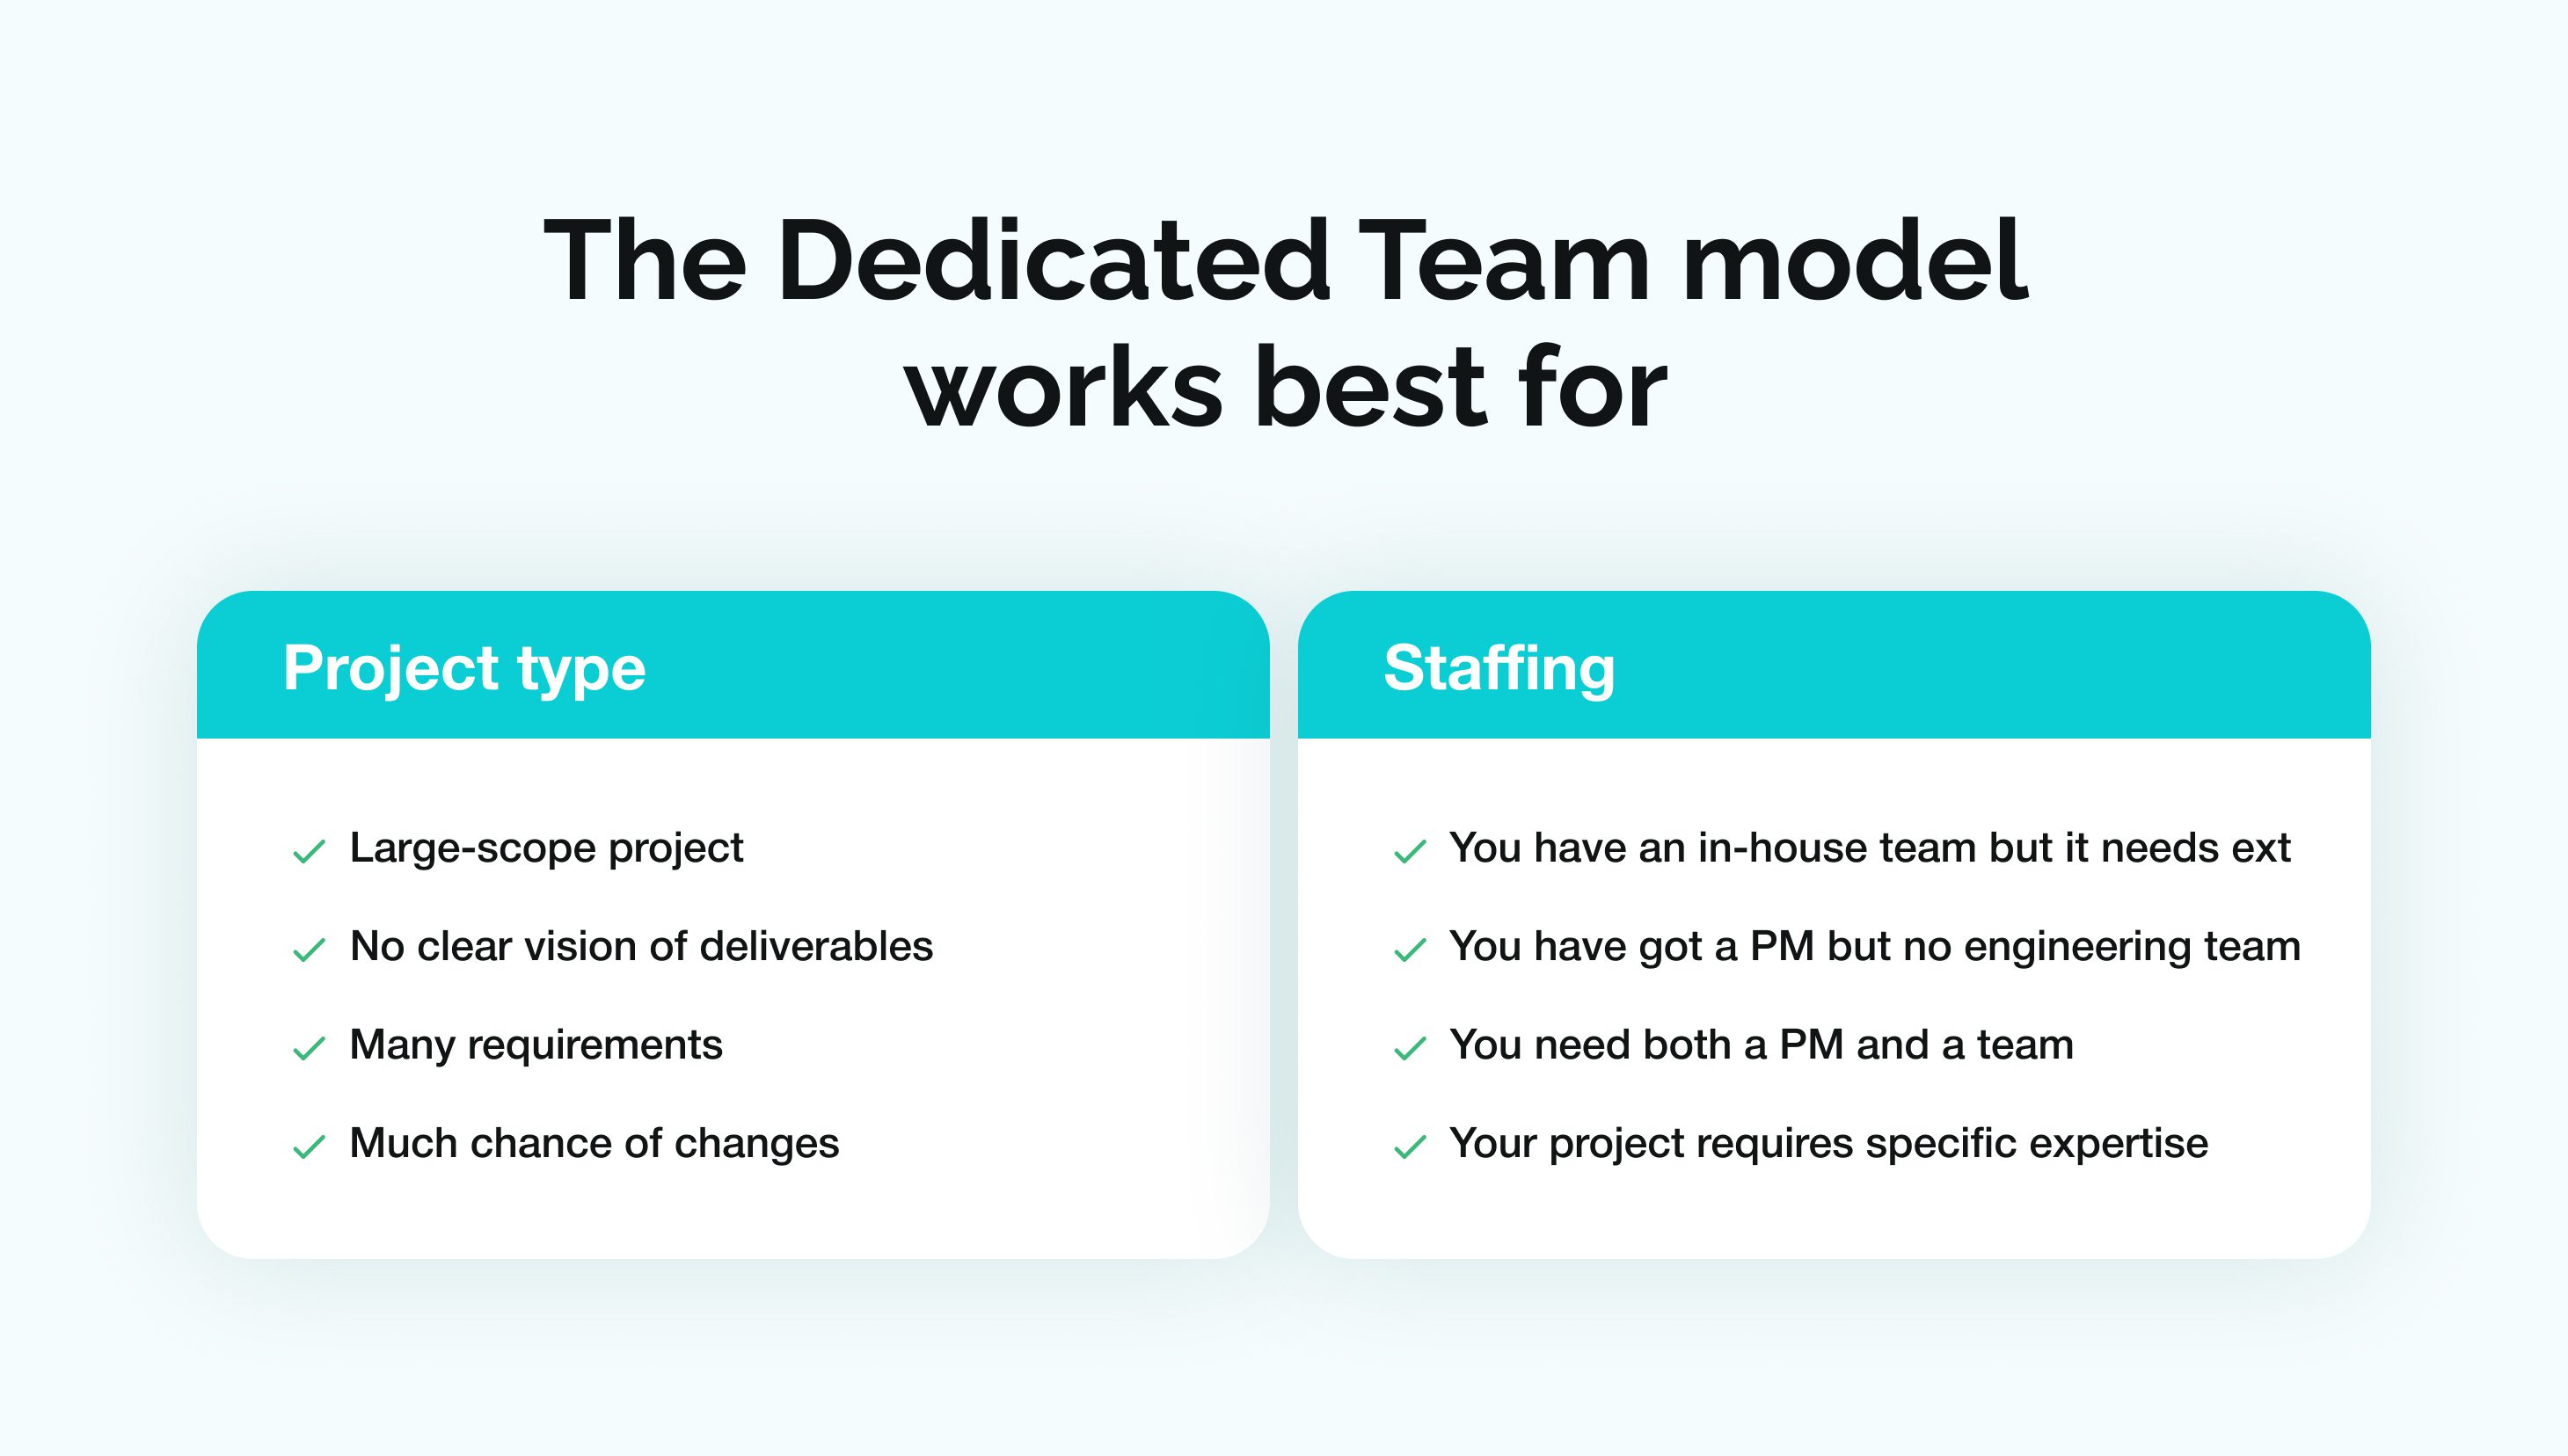 The Dedicated Team Model works best for:
1) Large-scope projects
2) No clear vision of deliverables
3) Many requirements
4) Much chance of changes